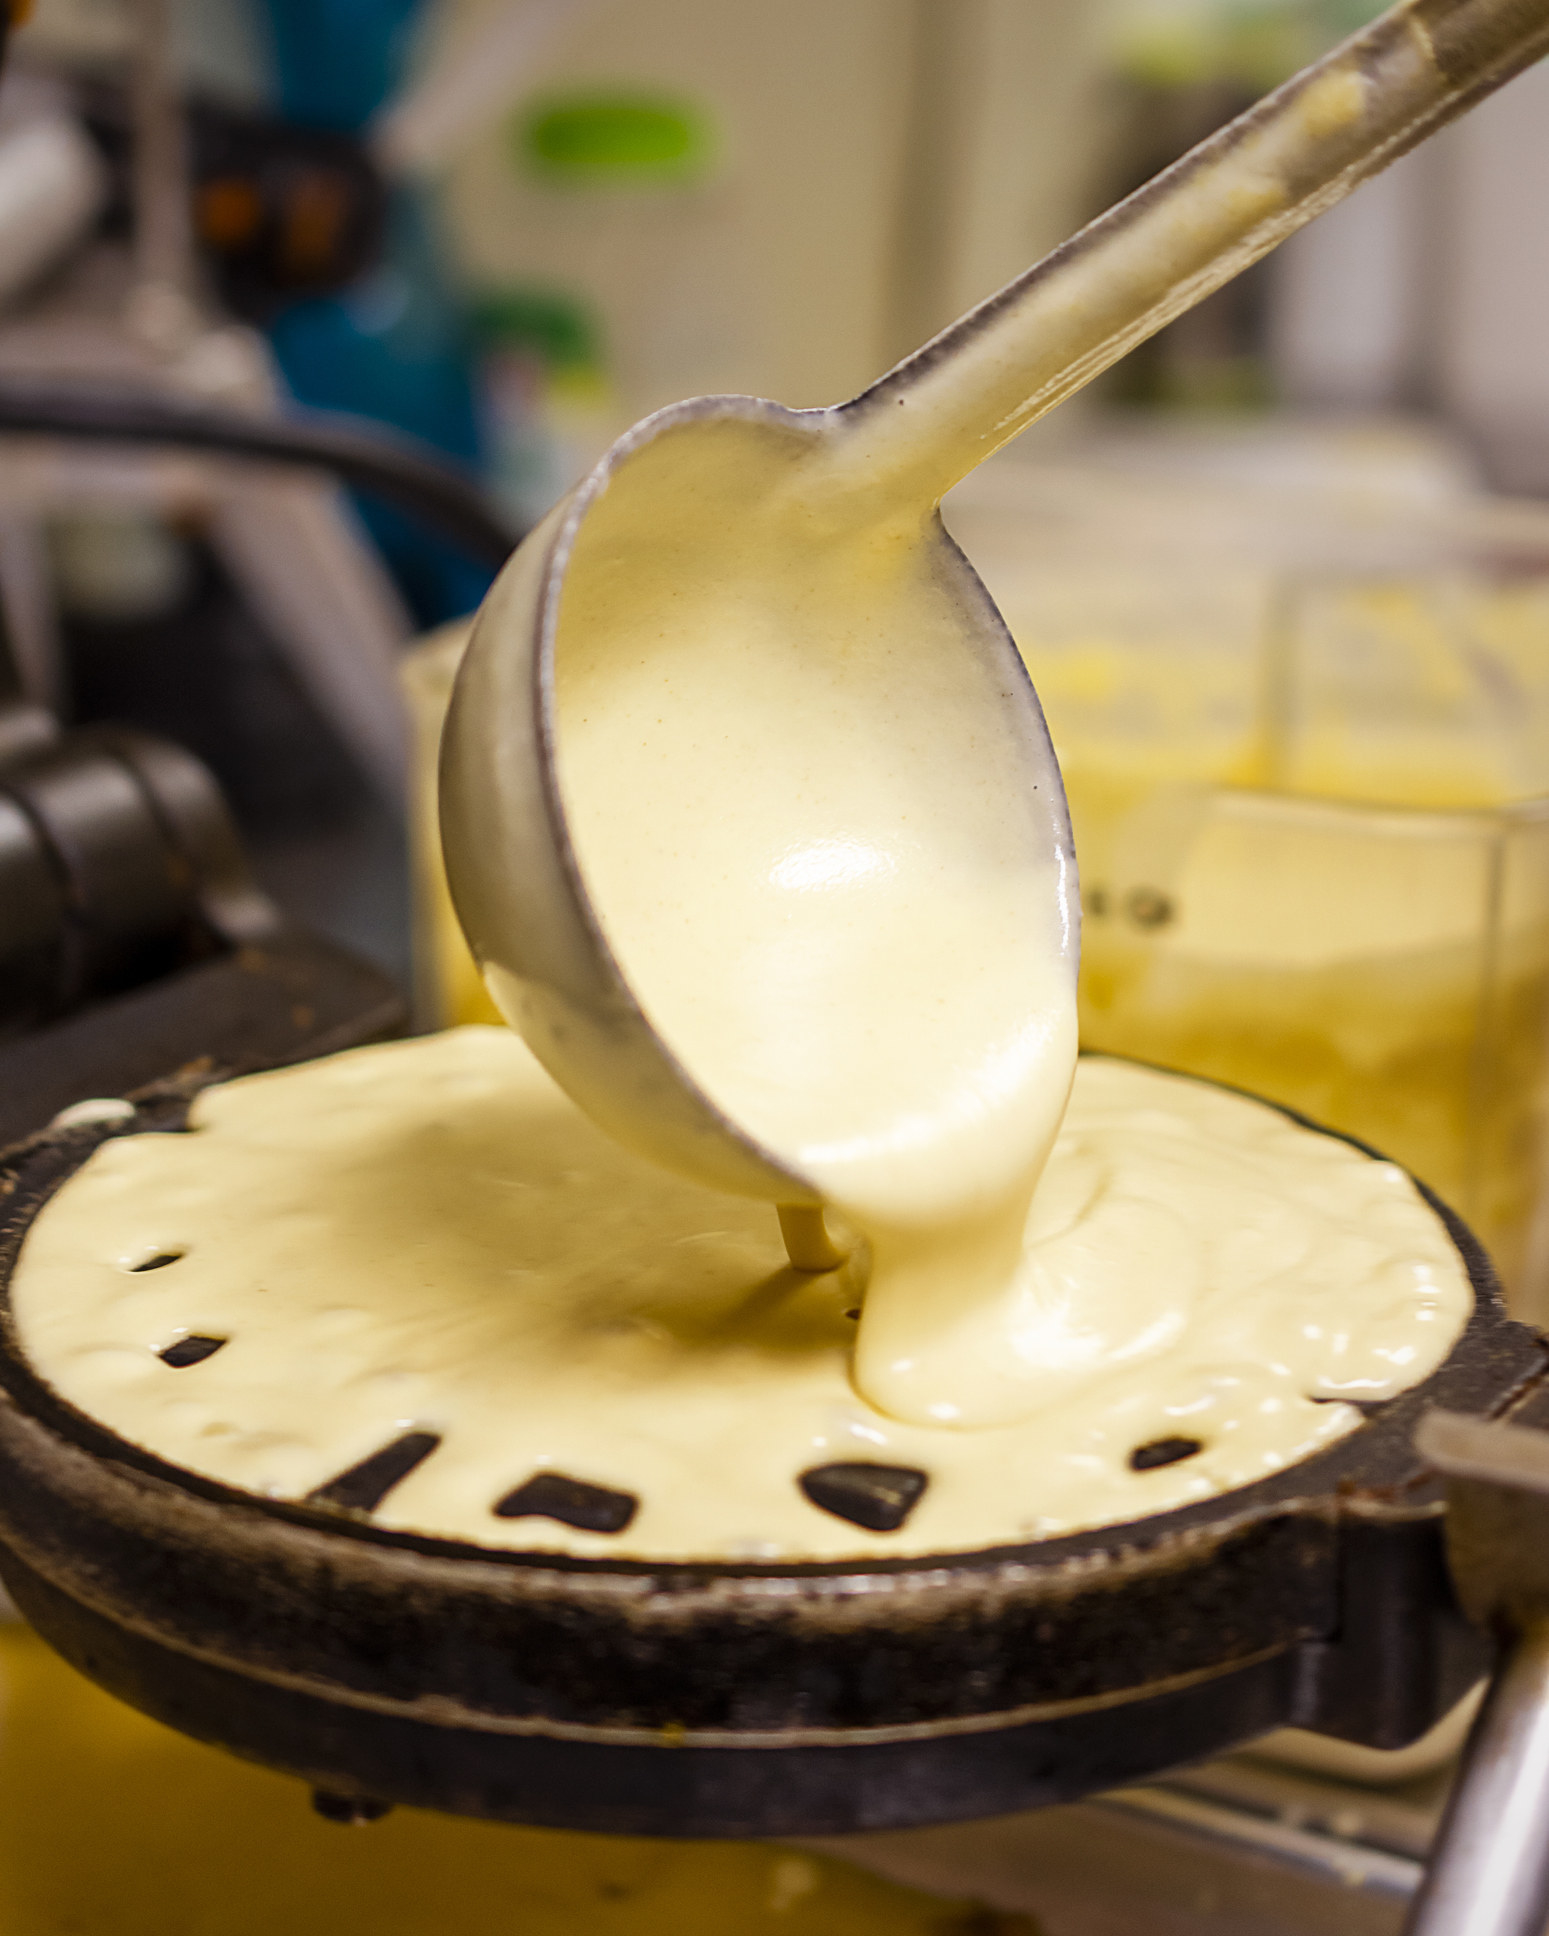 Waffle batter being poured into a waffle iron with a ladle.